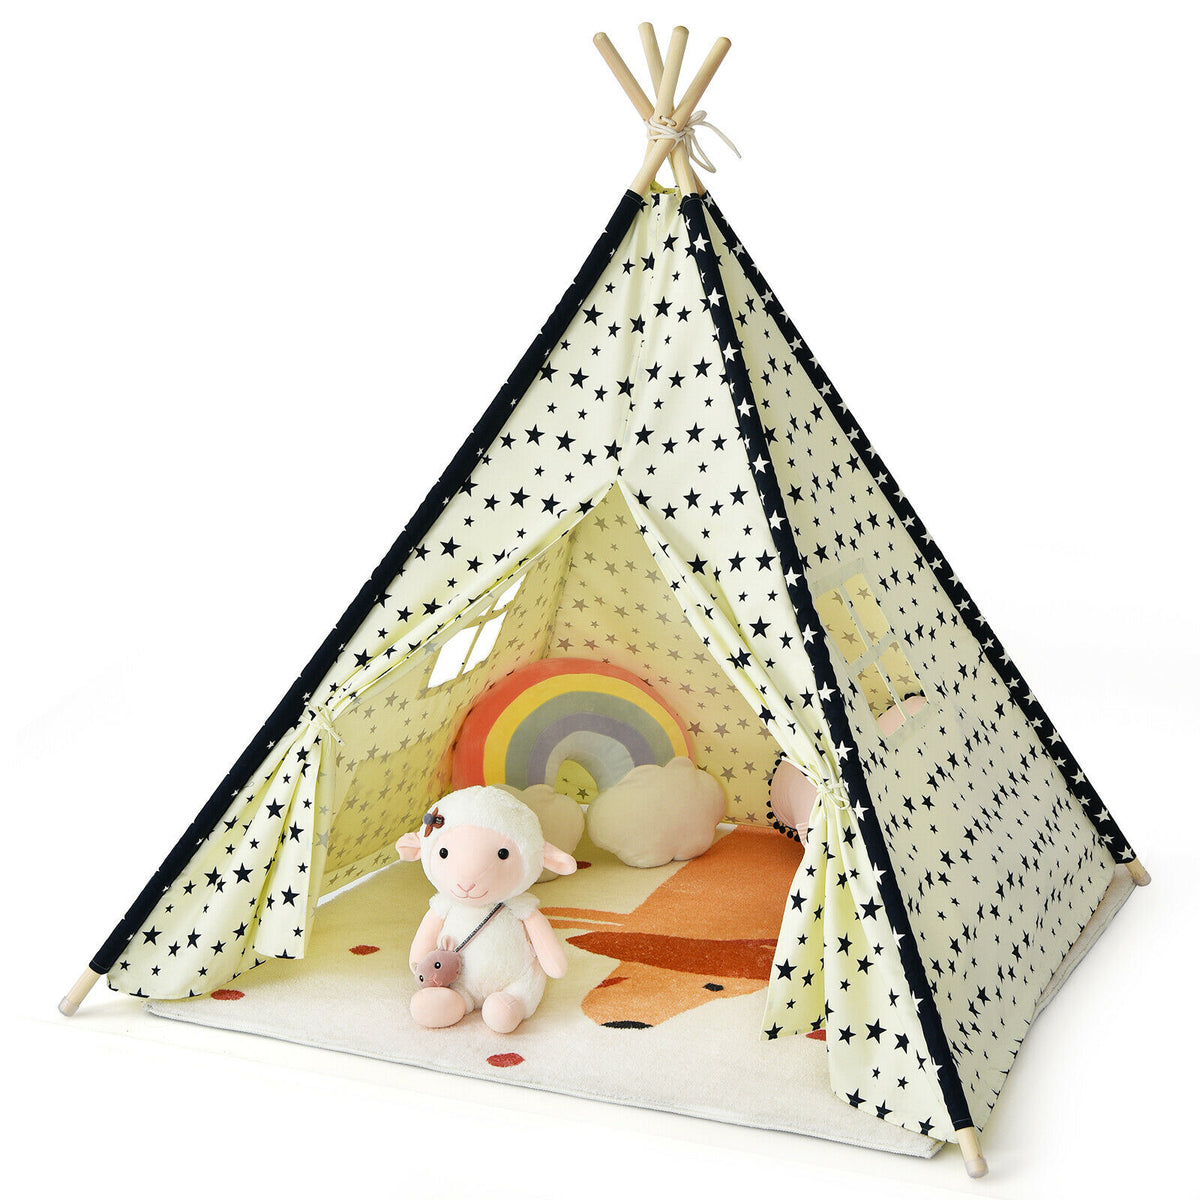 Children Teepee Play Tent Canvas Playhouse Folding Camping Wigwam